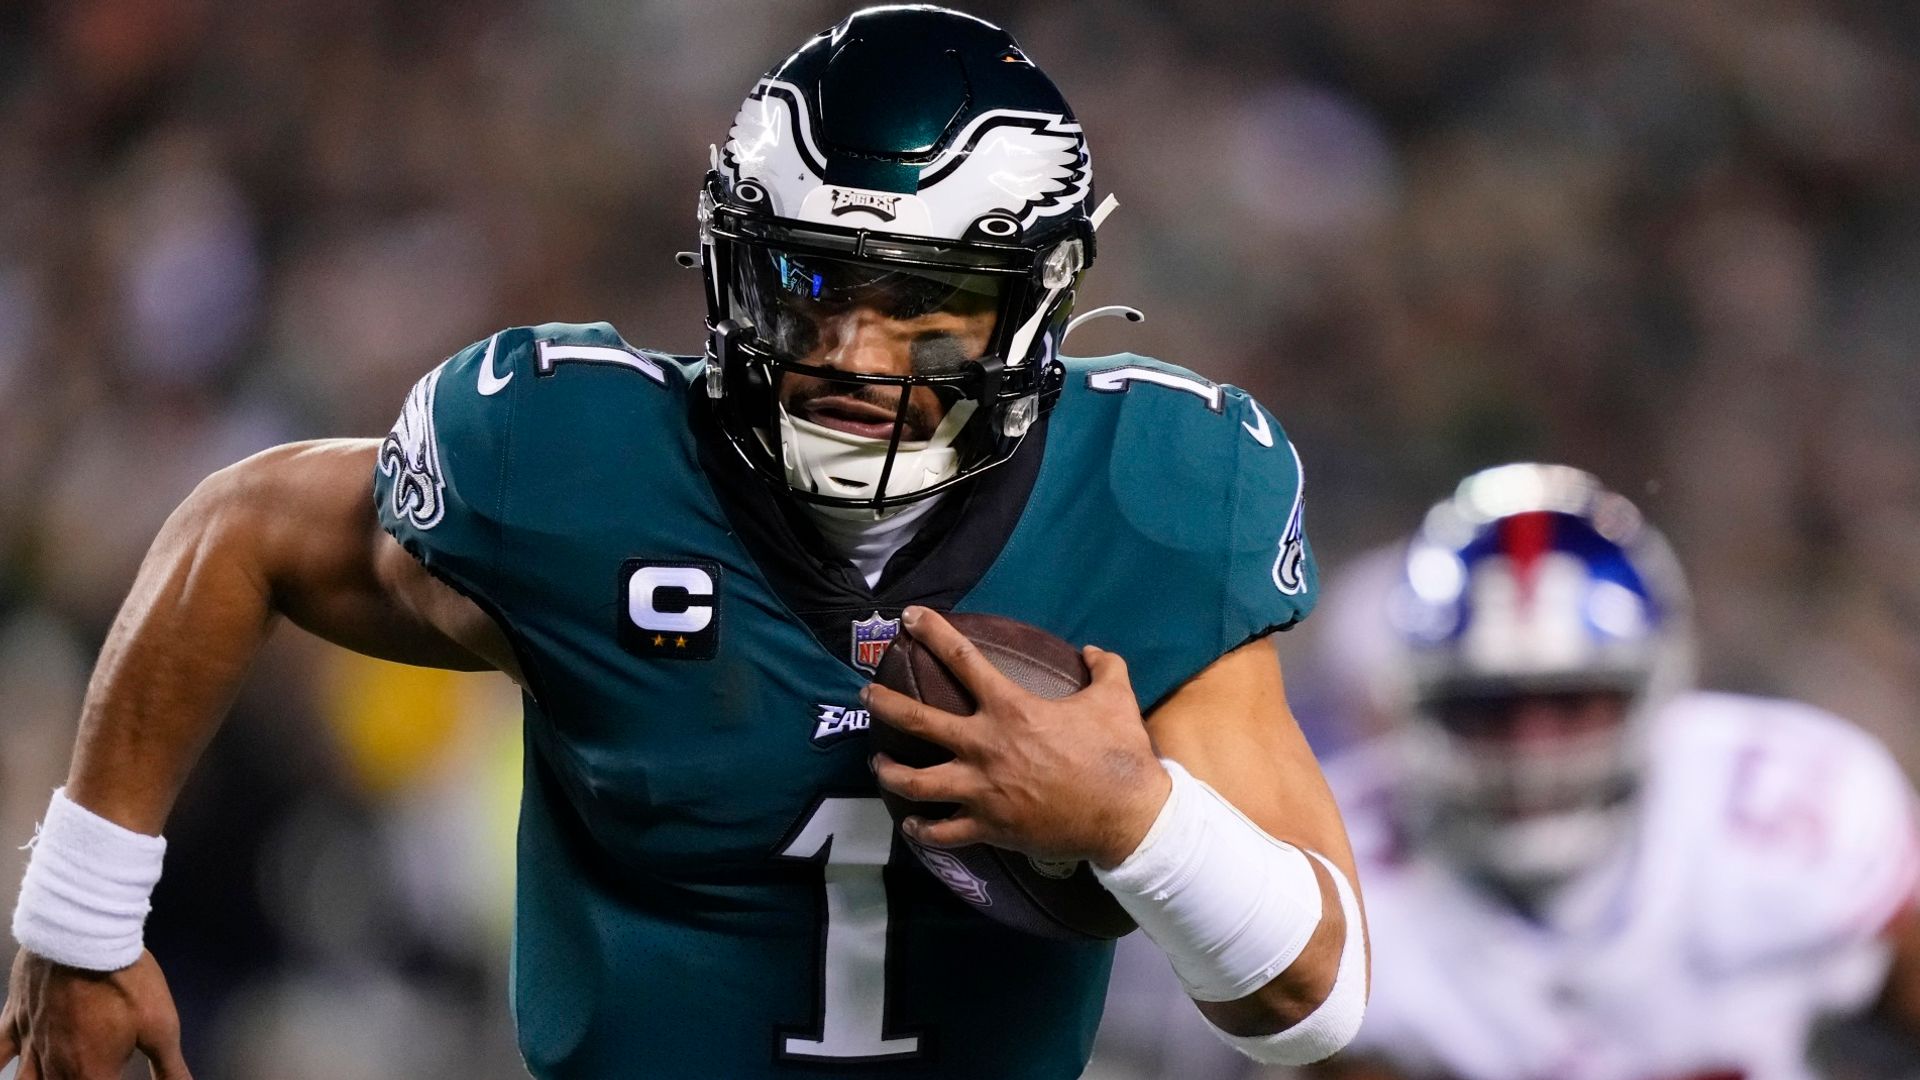 Eagles through to NFC title game with emphatic thumping of Giants